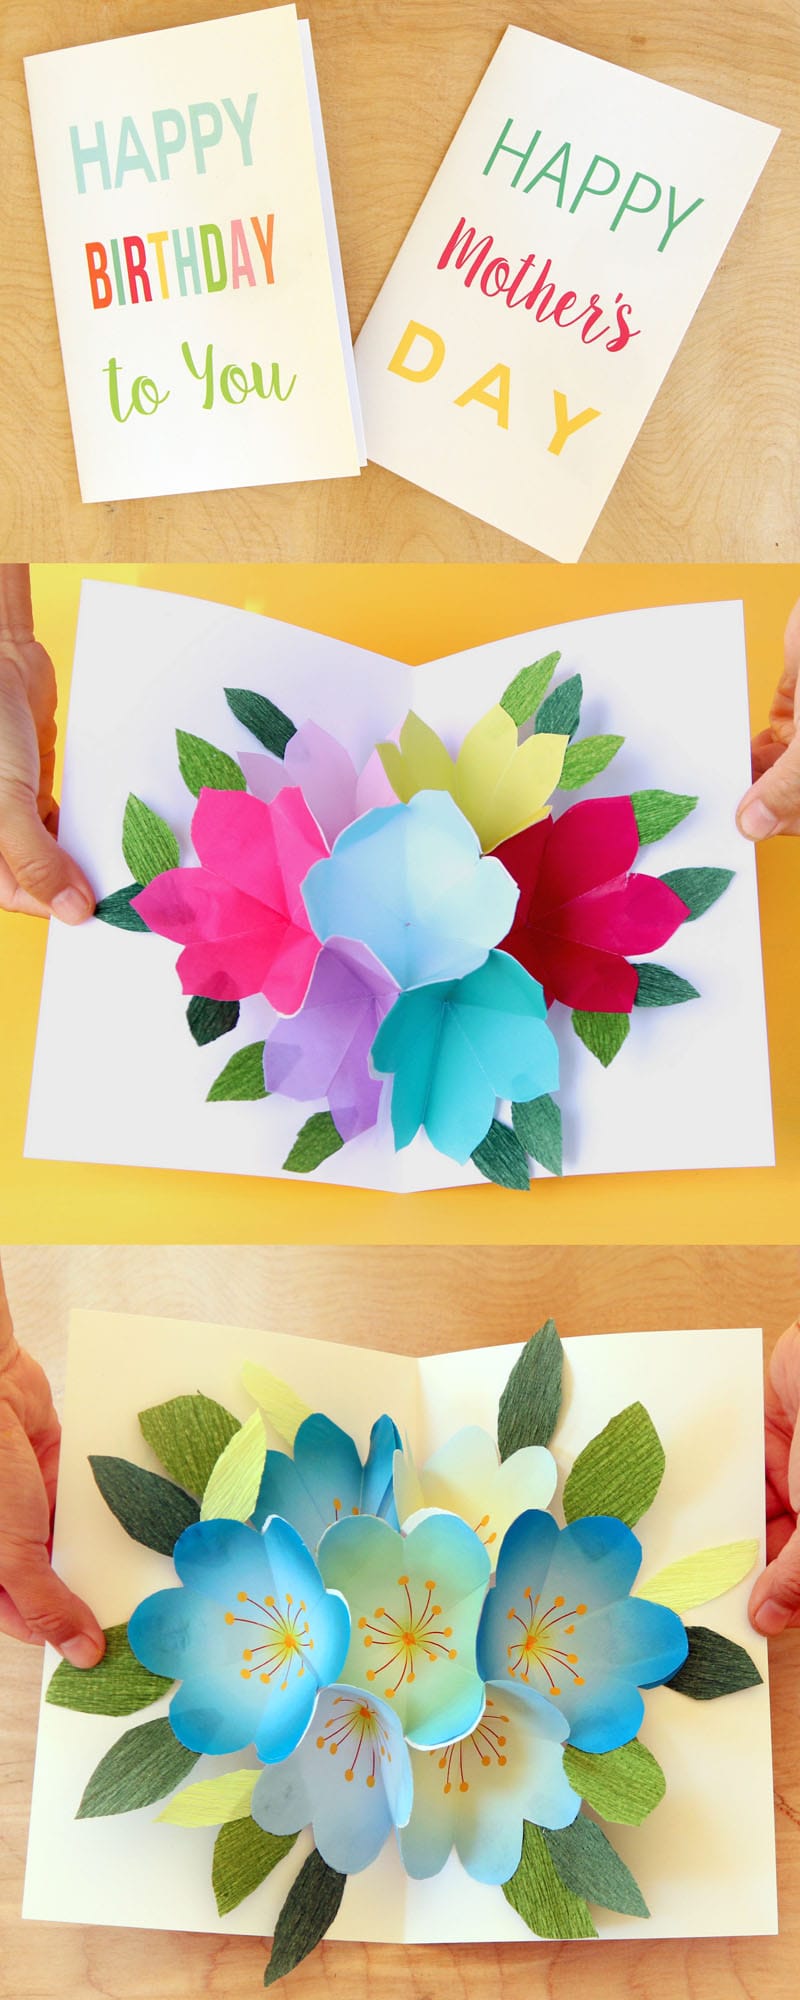 Free Printable Happy Birthday Card with Pop Up Bouquet - A Piece With Free Printable Pop Up Card Templates